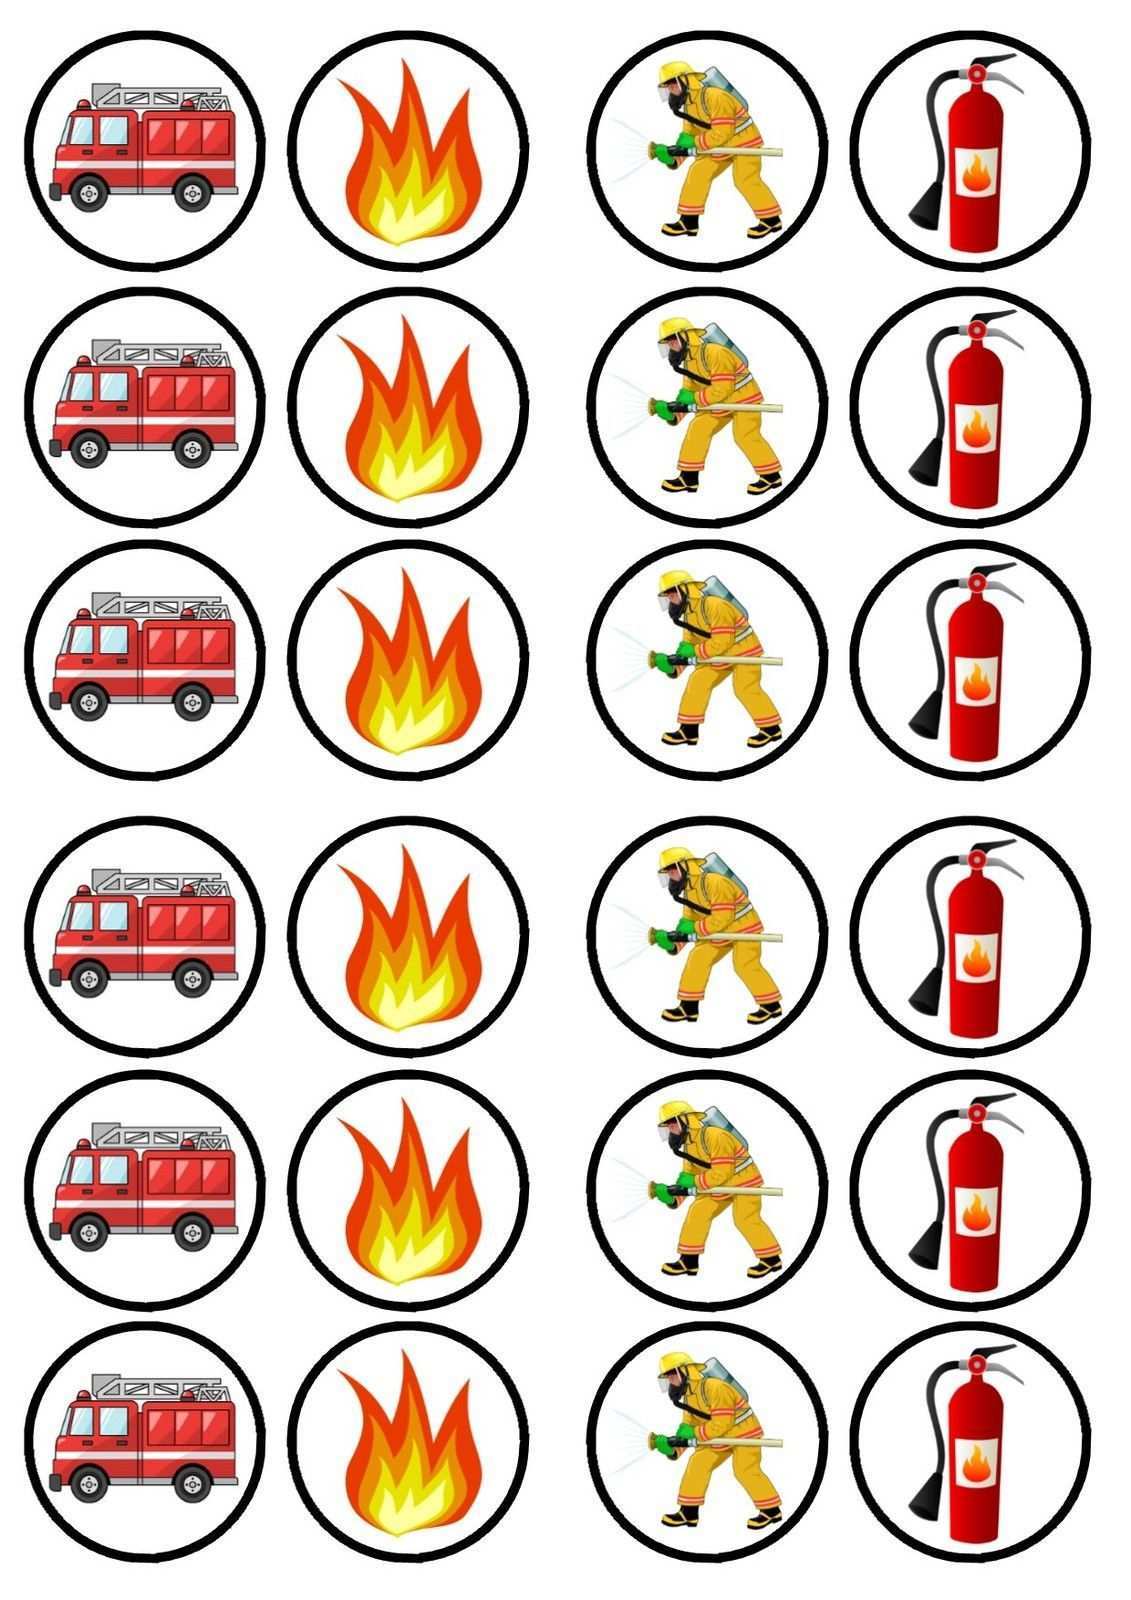 Fireman Fire Engine Edible Premium Sweetened Wafer Paper Cupcake Toppers Fire Fighter Birthday Party Fireman Cupcakes Firetruck Birthday Party